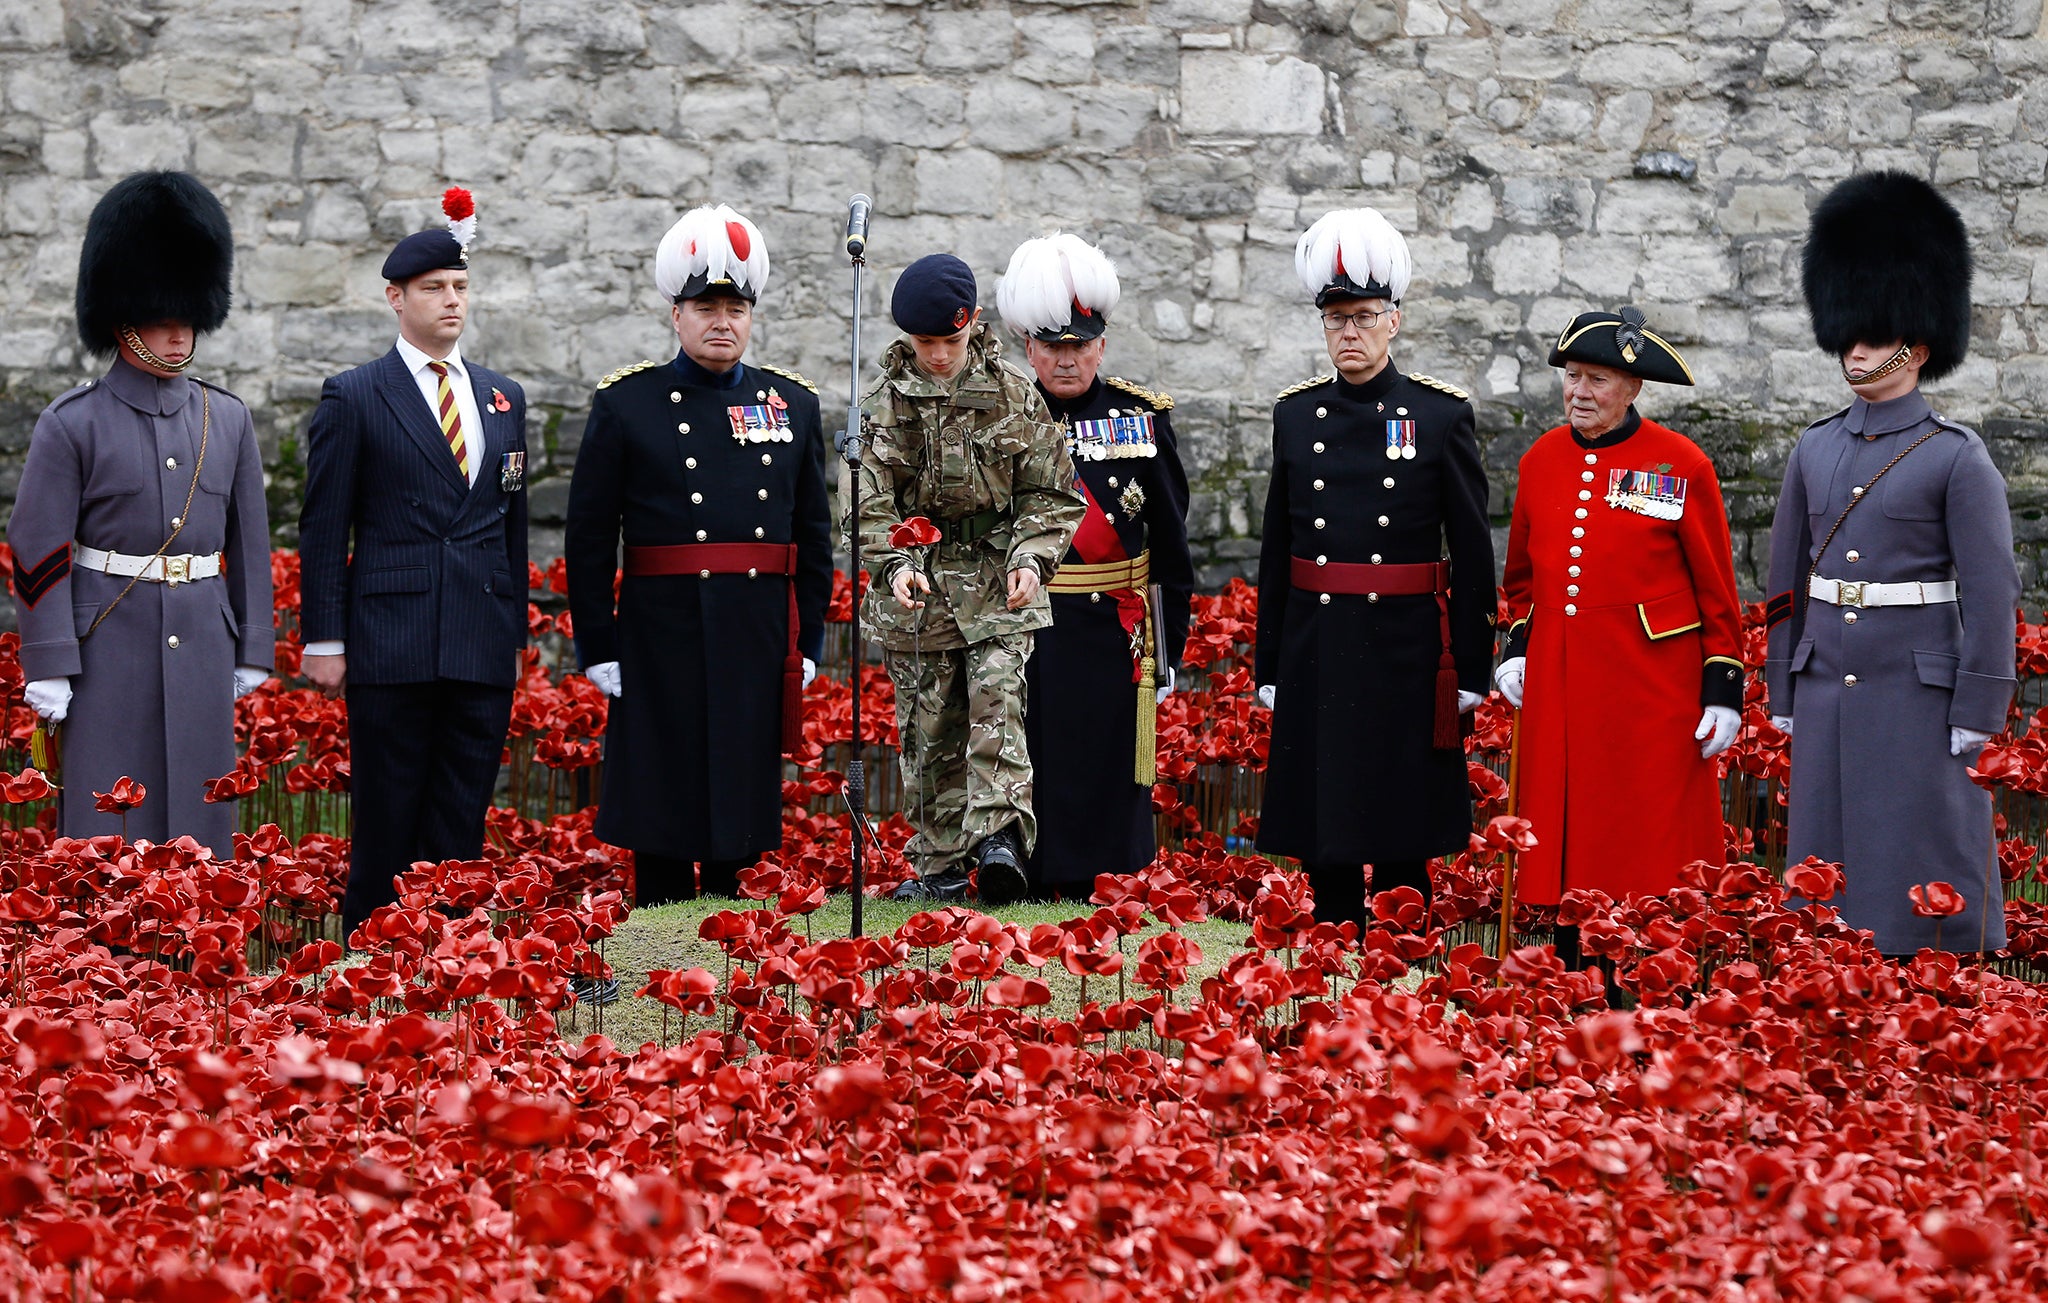 Cadet Harry Alexander Hayes plants the last poppy during a remembrance day ceremony into the ceramic poppy art installation by artist Paul Cummins entitled 'Blood Swept Lands and Seas of Red' in the dry moat of the Tower of London